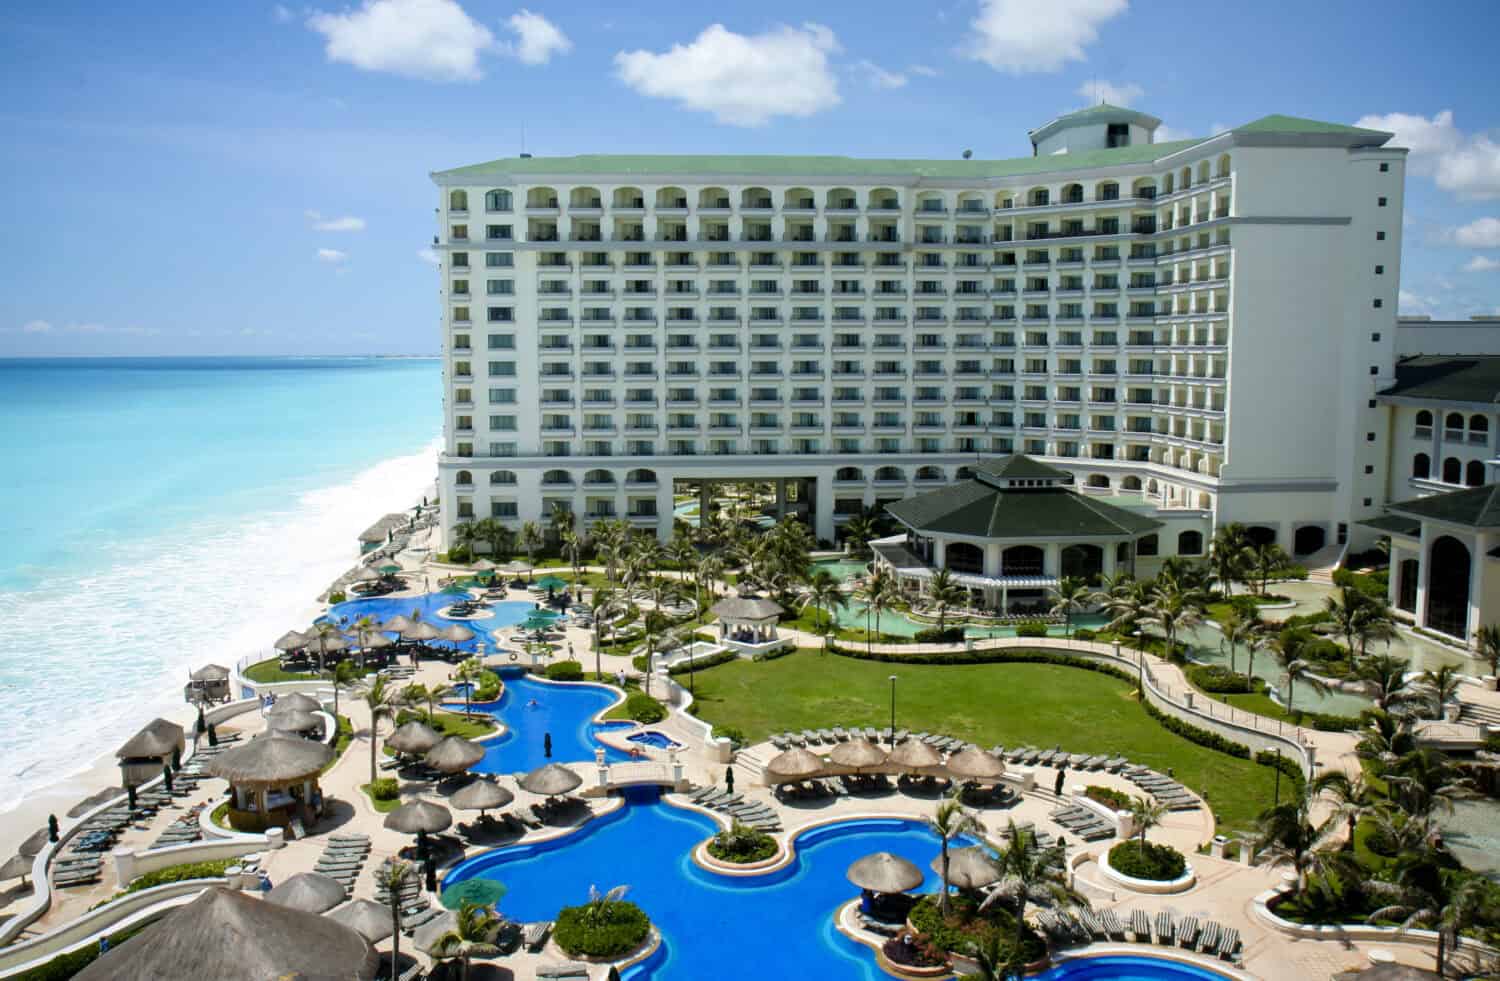 <ul> <li><strong>Sample Cost: </strong>$4,326 – $6,176 (Live Aqua Beach Resort)</li> </ul> <p>Anyone looking for a stronger sense of luxury should stop at the Live Aqua Beach Resort in Cancun. Designed as a luxury hotel and another Oyster Award Winner, this adults-only hotel is nothing but class. All of the rooms are high-end with the all-inclusive plan offering a la carte, buffet options, and multiple bars. Plus, with only 371 rooms, you won't feel that busy at any point during the day.</p> <p>Looking at cost, you're looking at around $510 per night as the best possible cost from 6/23 to 6/30. For a Premium Partial Ocean View room with one king bed, this breaks down to $4,326 for the whole stay with taxes included. Switch things up into December for 12/22 – 12/29 and the cost jumps considerably. The least expensive room, the Premium Garden View 2 Double will cost $6,176 for the whole stay, taxes included.</p> <p>Agree with this? Hit the Thumbs Up button above. Disagree? Let us know in the comments with what you'd change.</p>